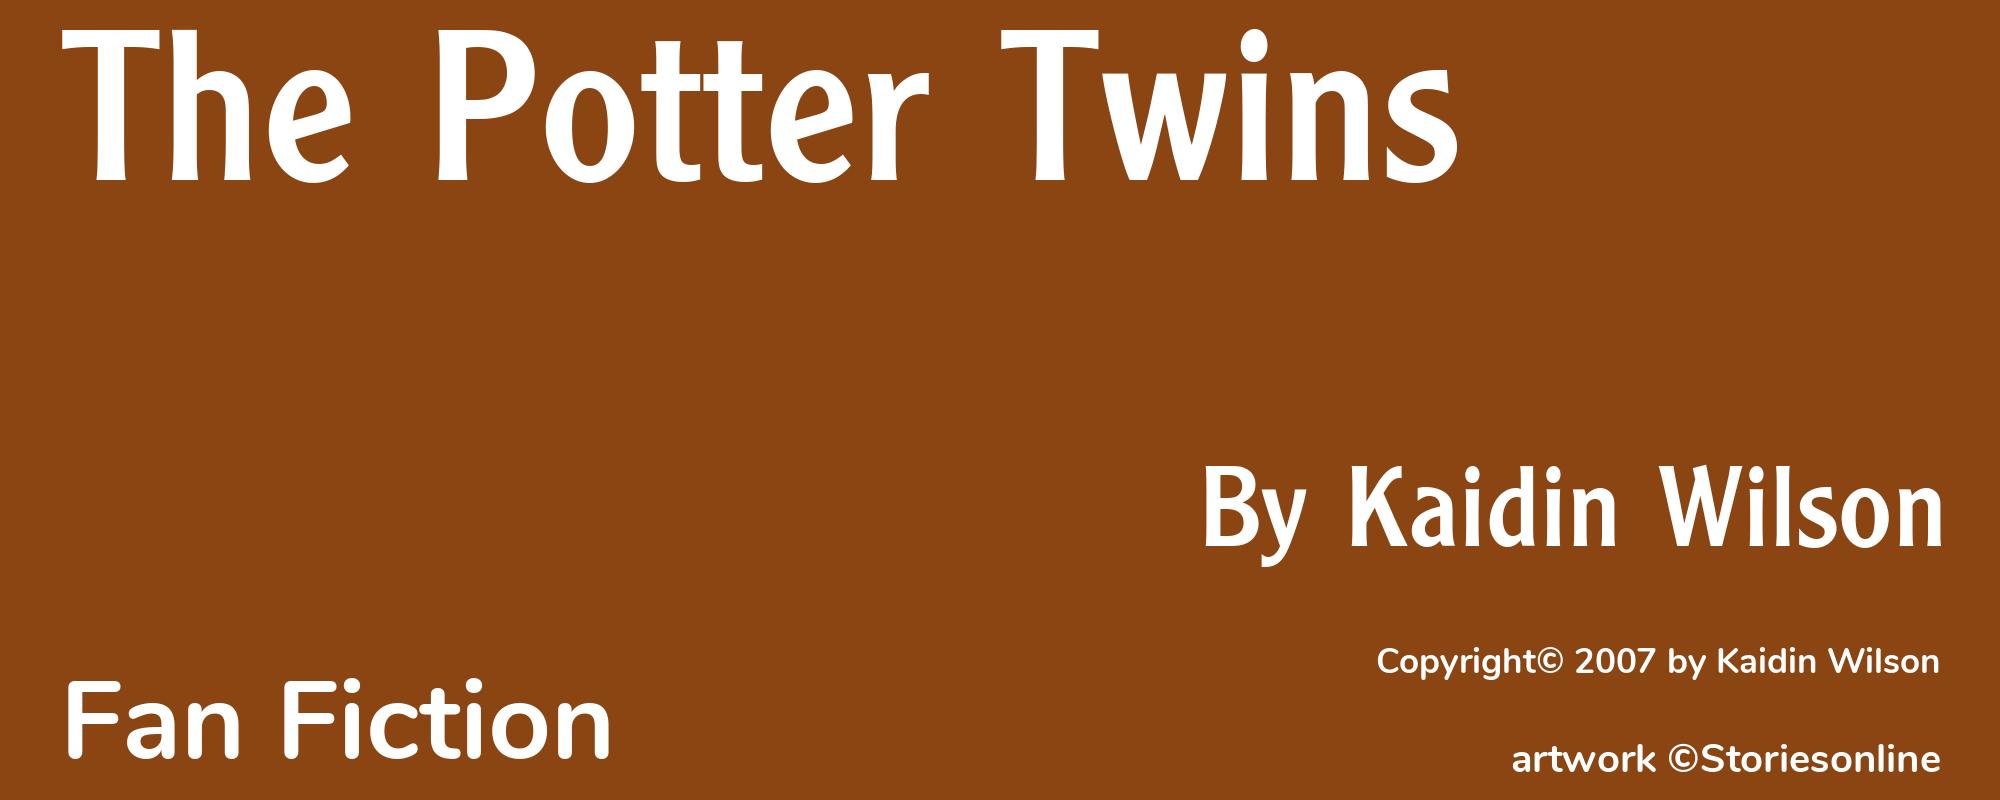 The Potter Twins - Cover